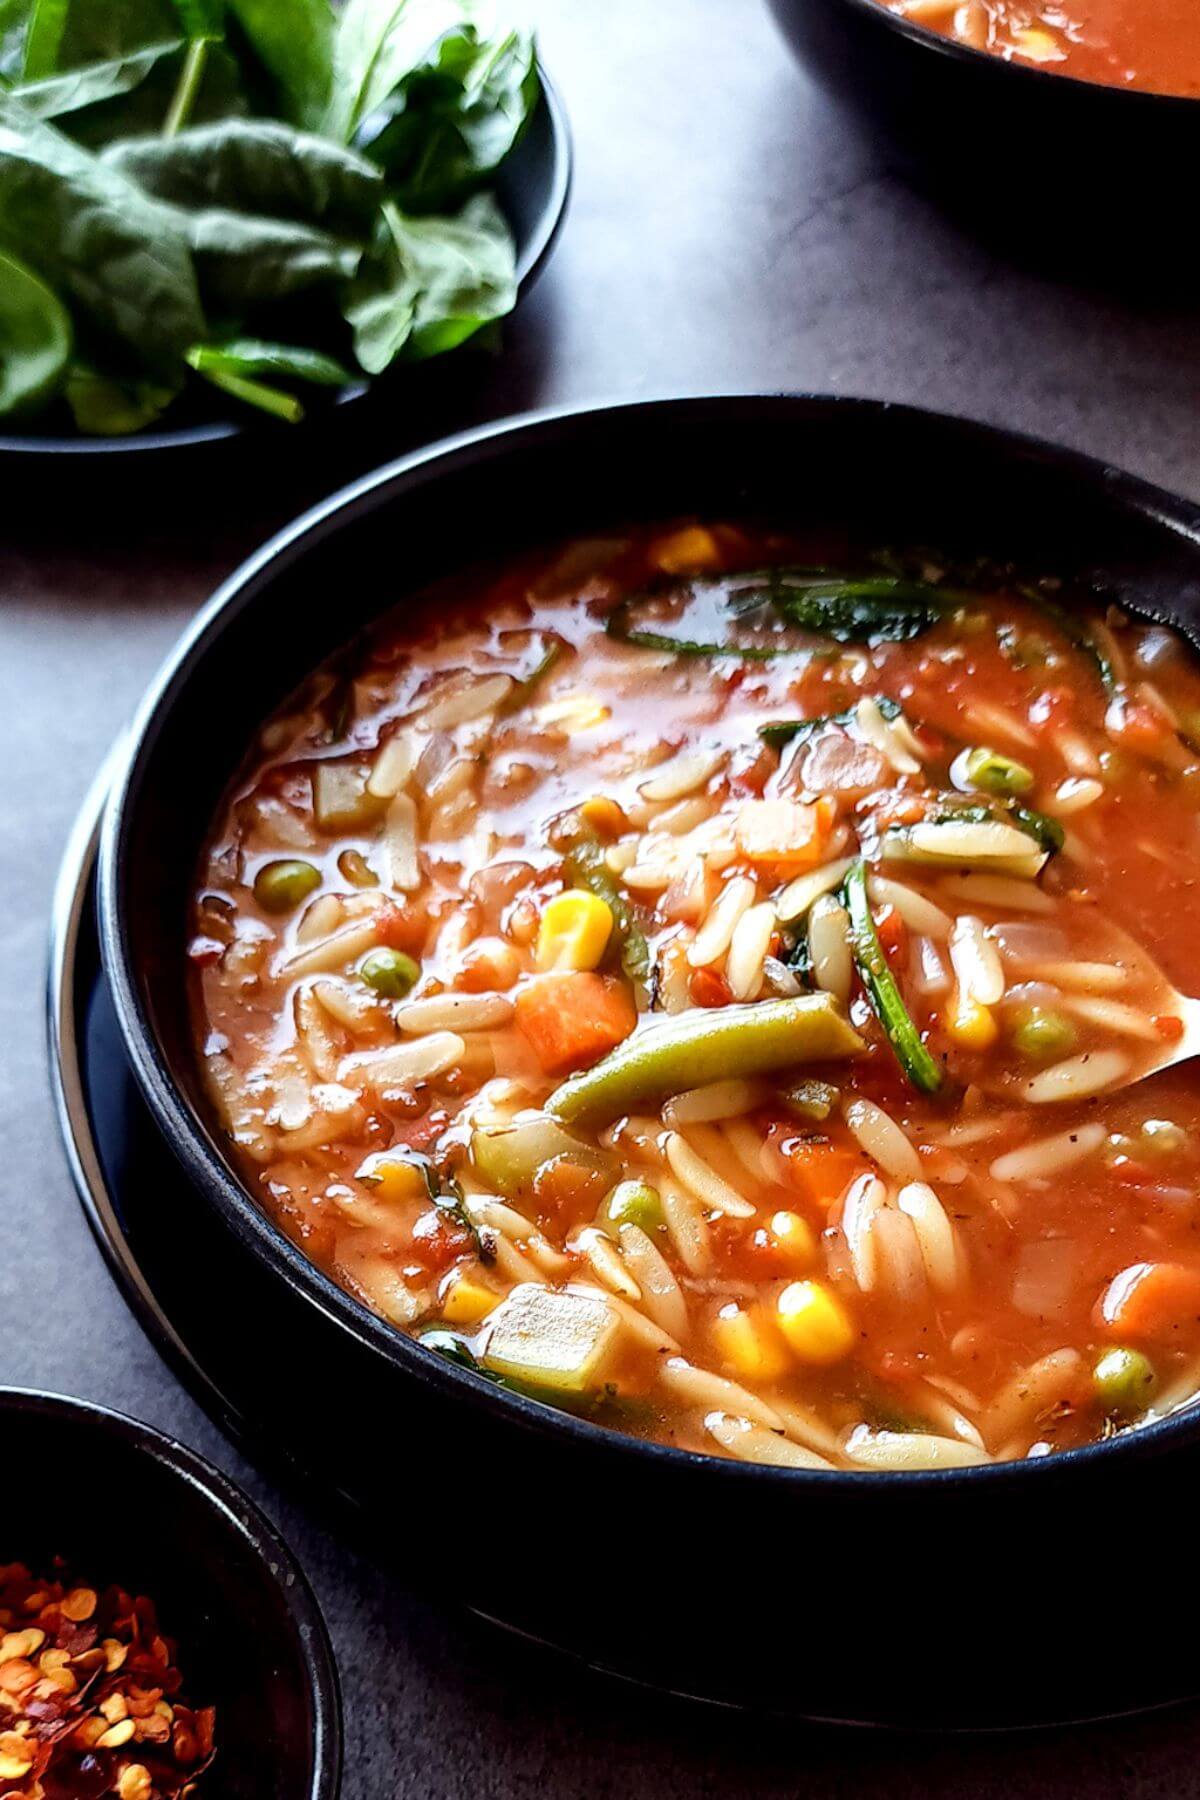 Vegetable orzo soup in a black bowl with bowls of baby spinach and chili flakes on the side.